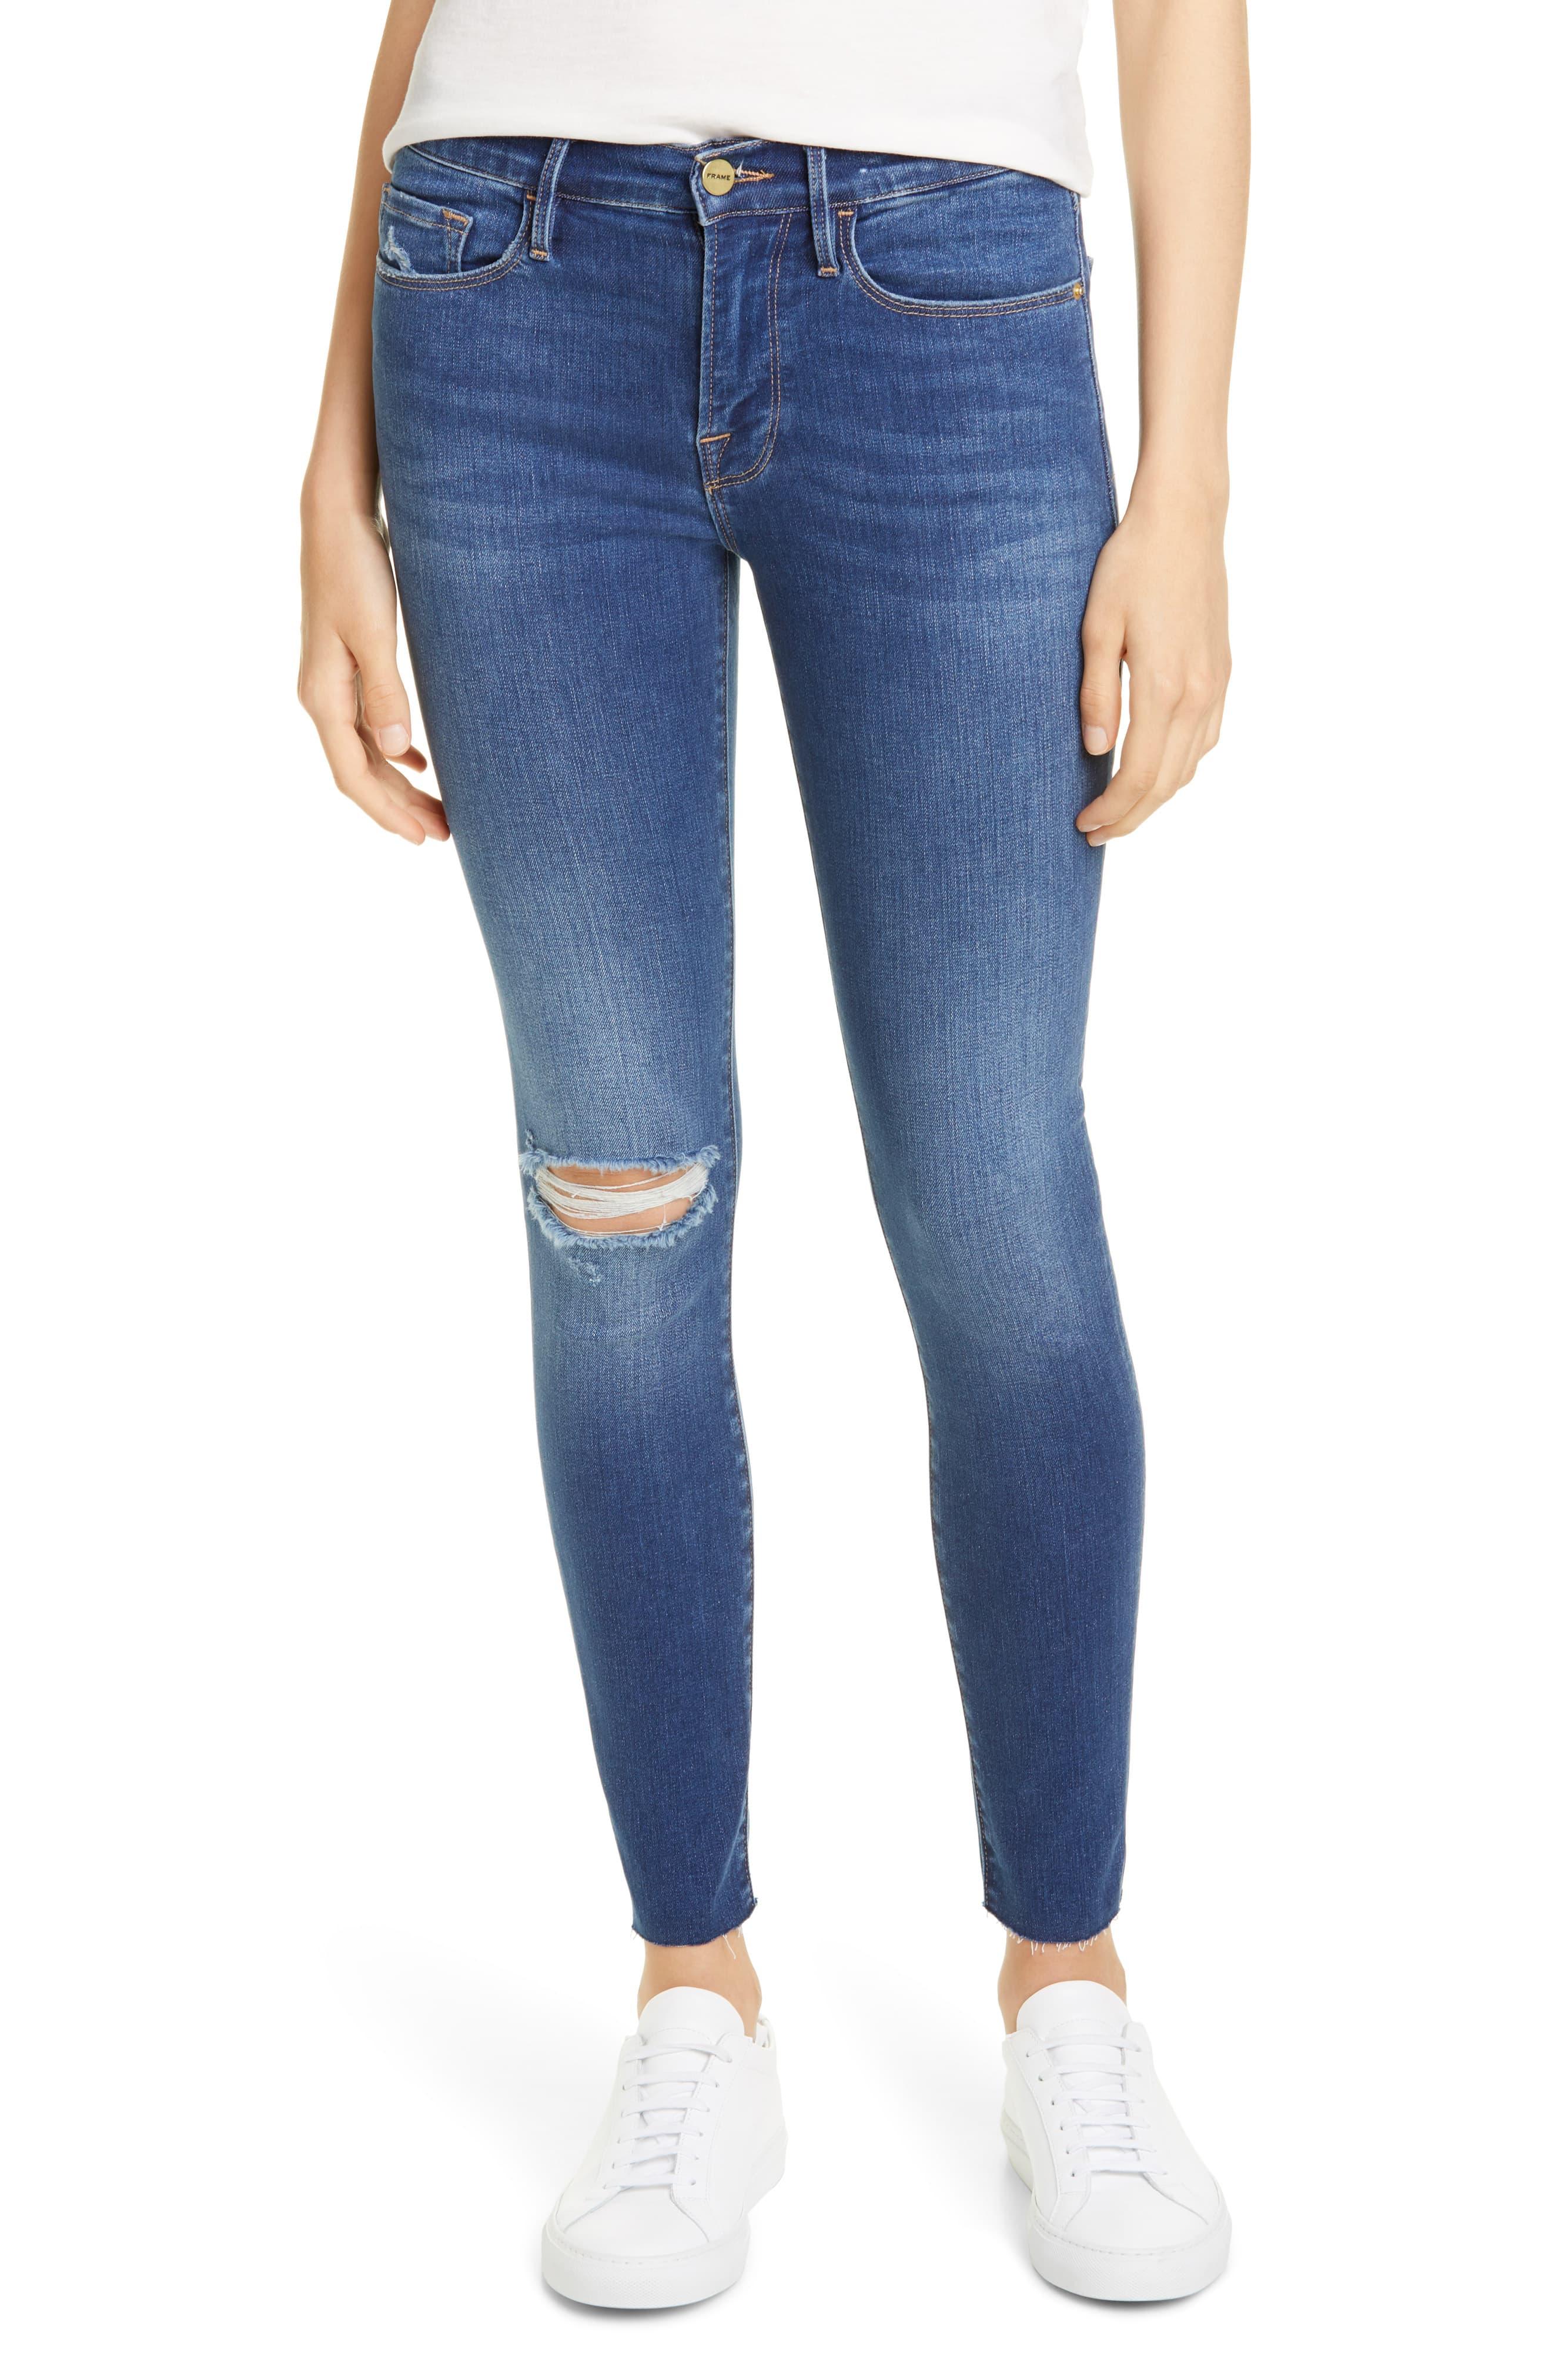 FRAME Denim Le Raw Edge Ripped Crop Skinny Jeans in Blue - Lyst